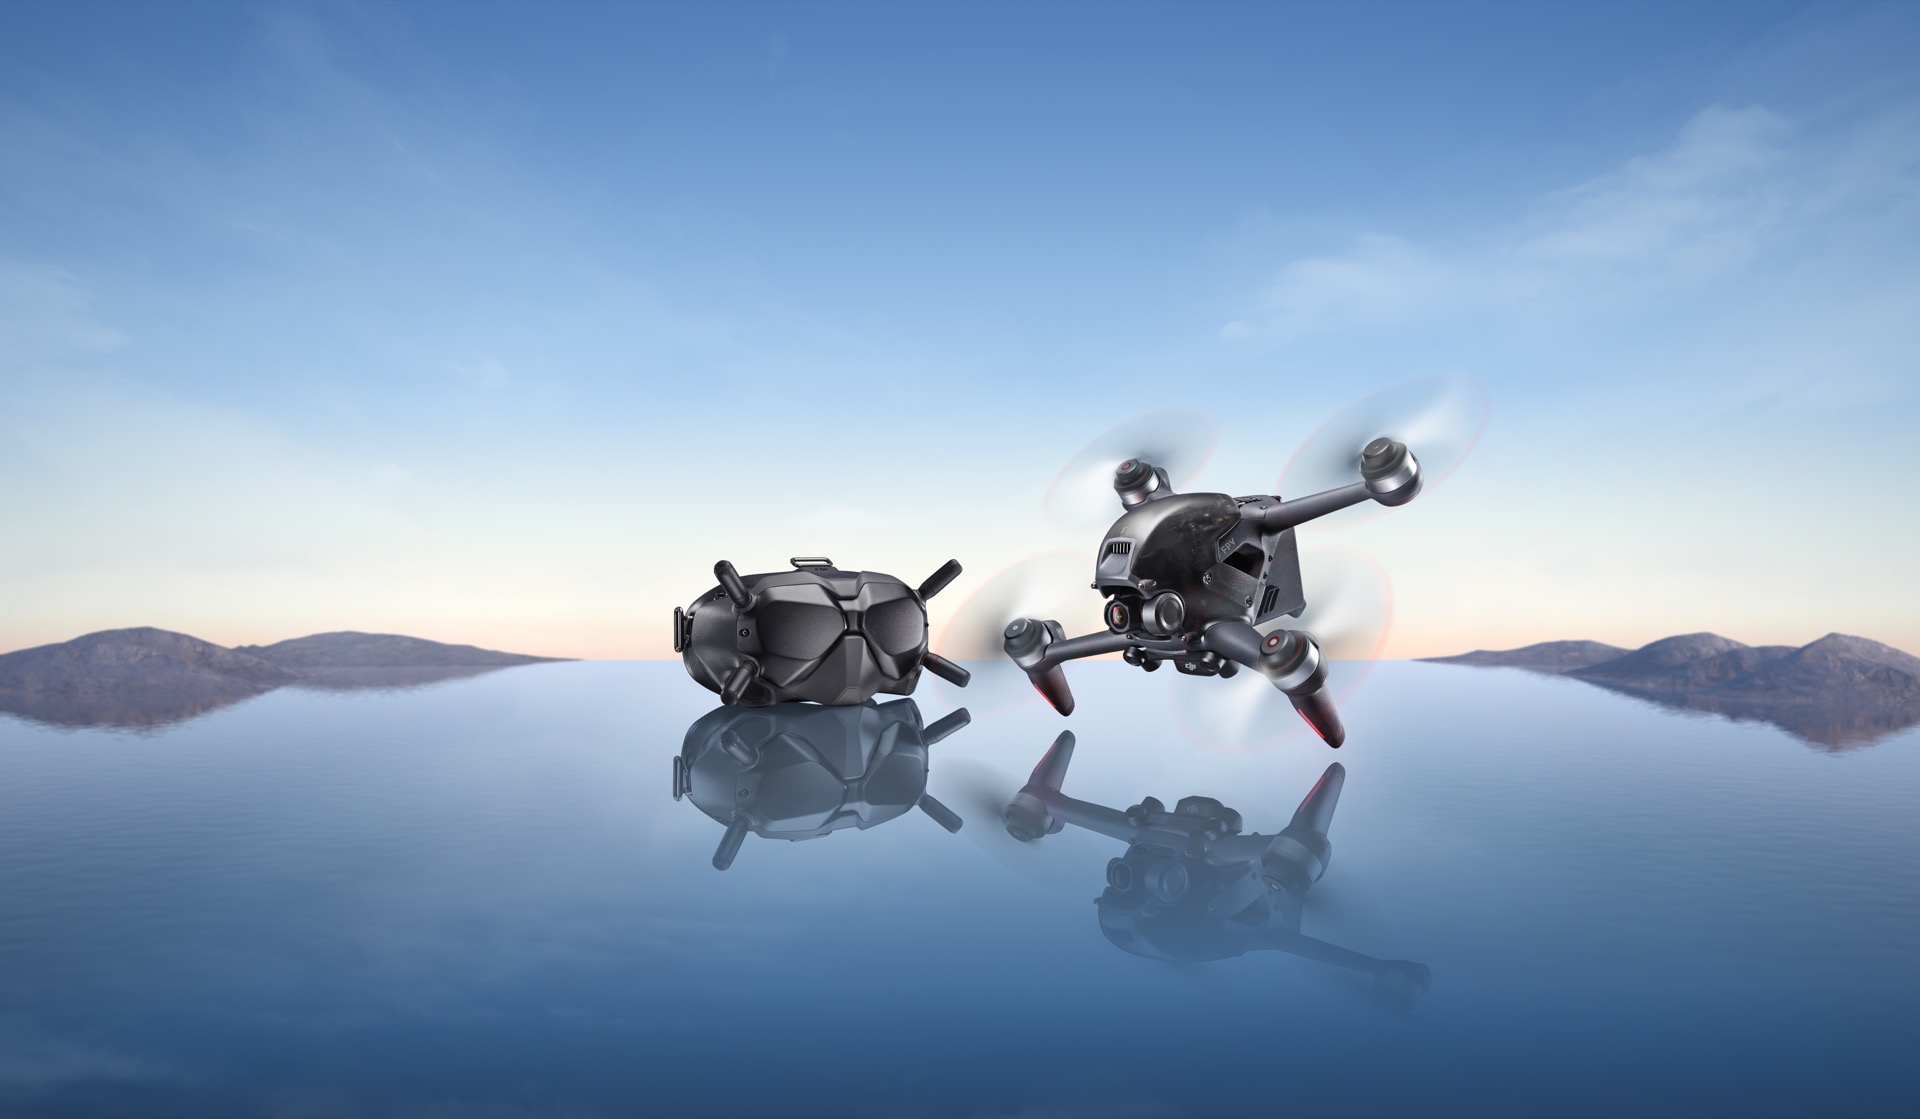 DJI introduces The DJI FPV Drone - Newsshooter